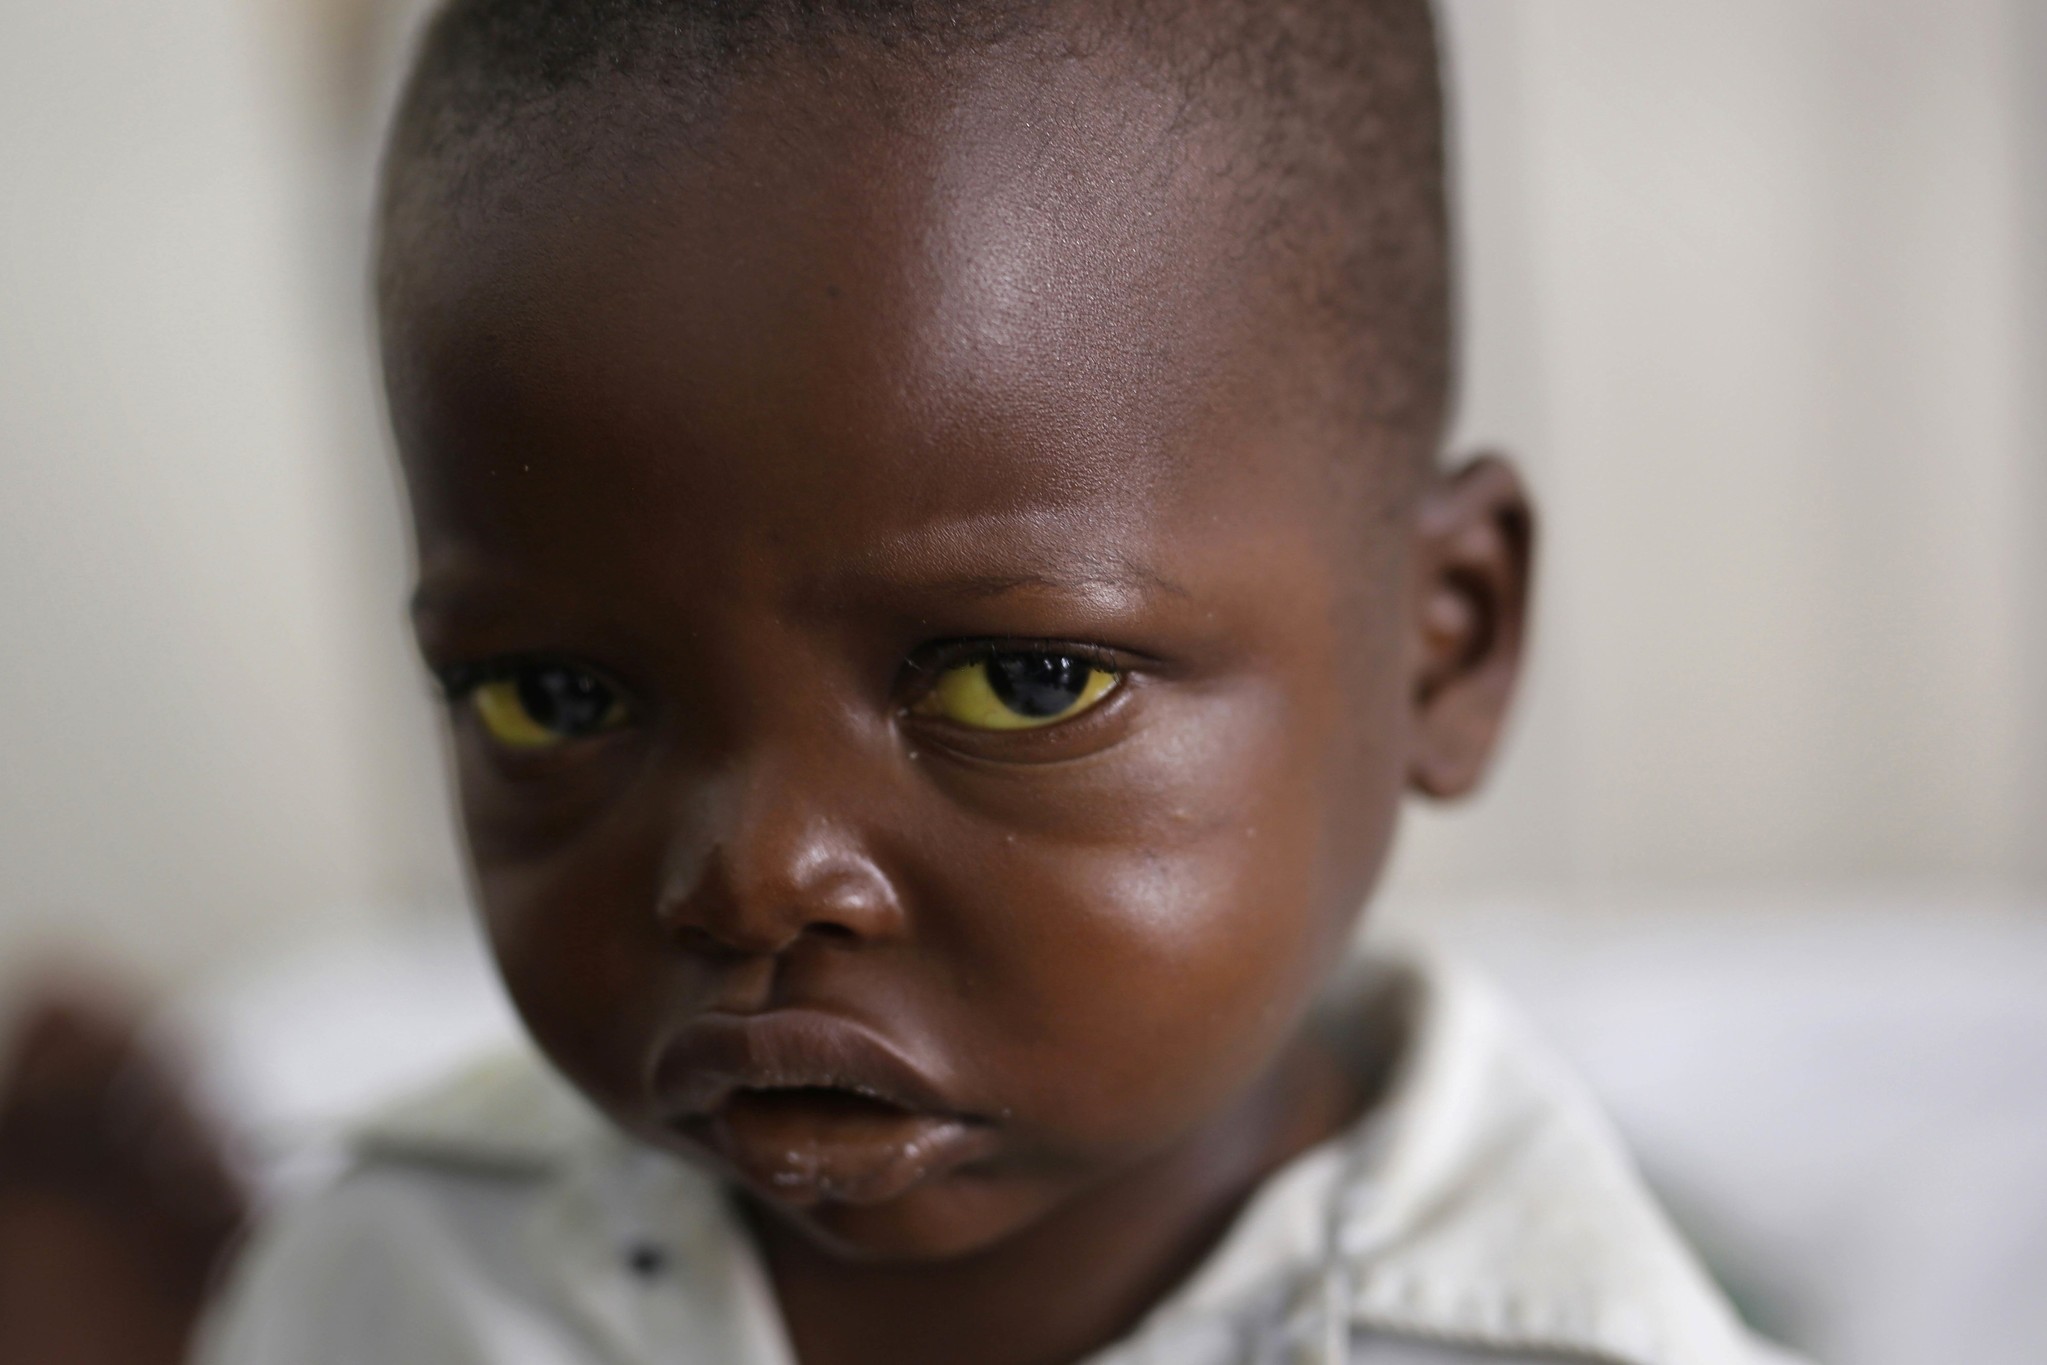 Three-year-old Jonathan Kangu sits on his hospital bed in Kinshasa, Congo, on Tuesday, July 19, 2016, suffering from symptoms of yellow fever, including yellowed eyes. (AP Photo)